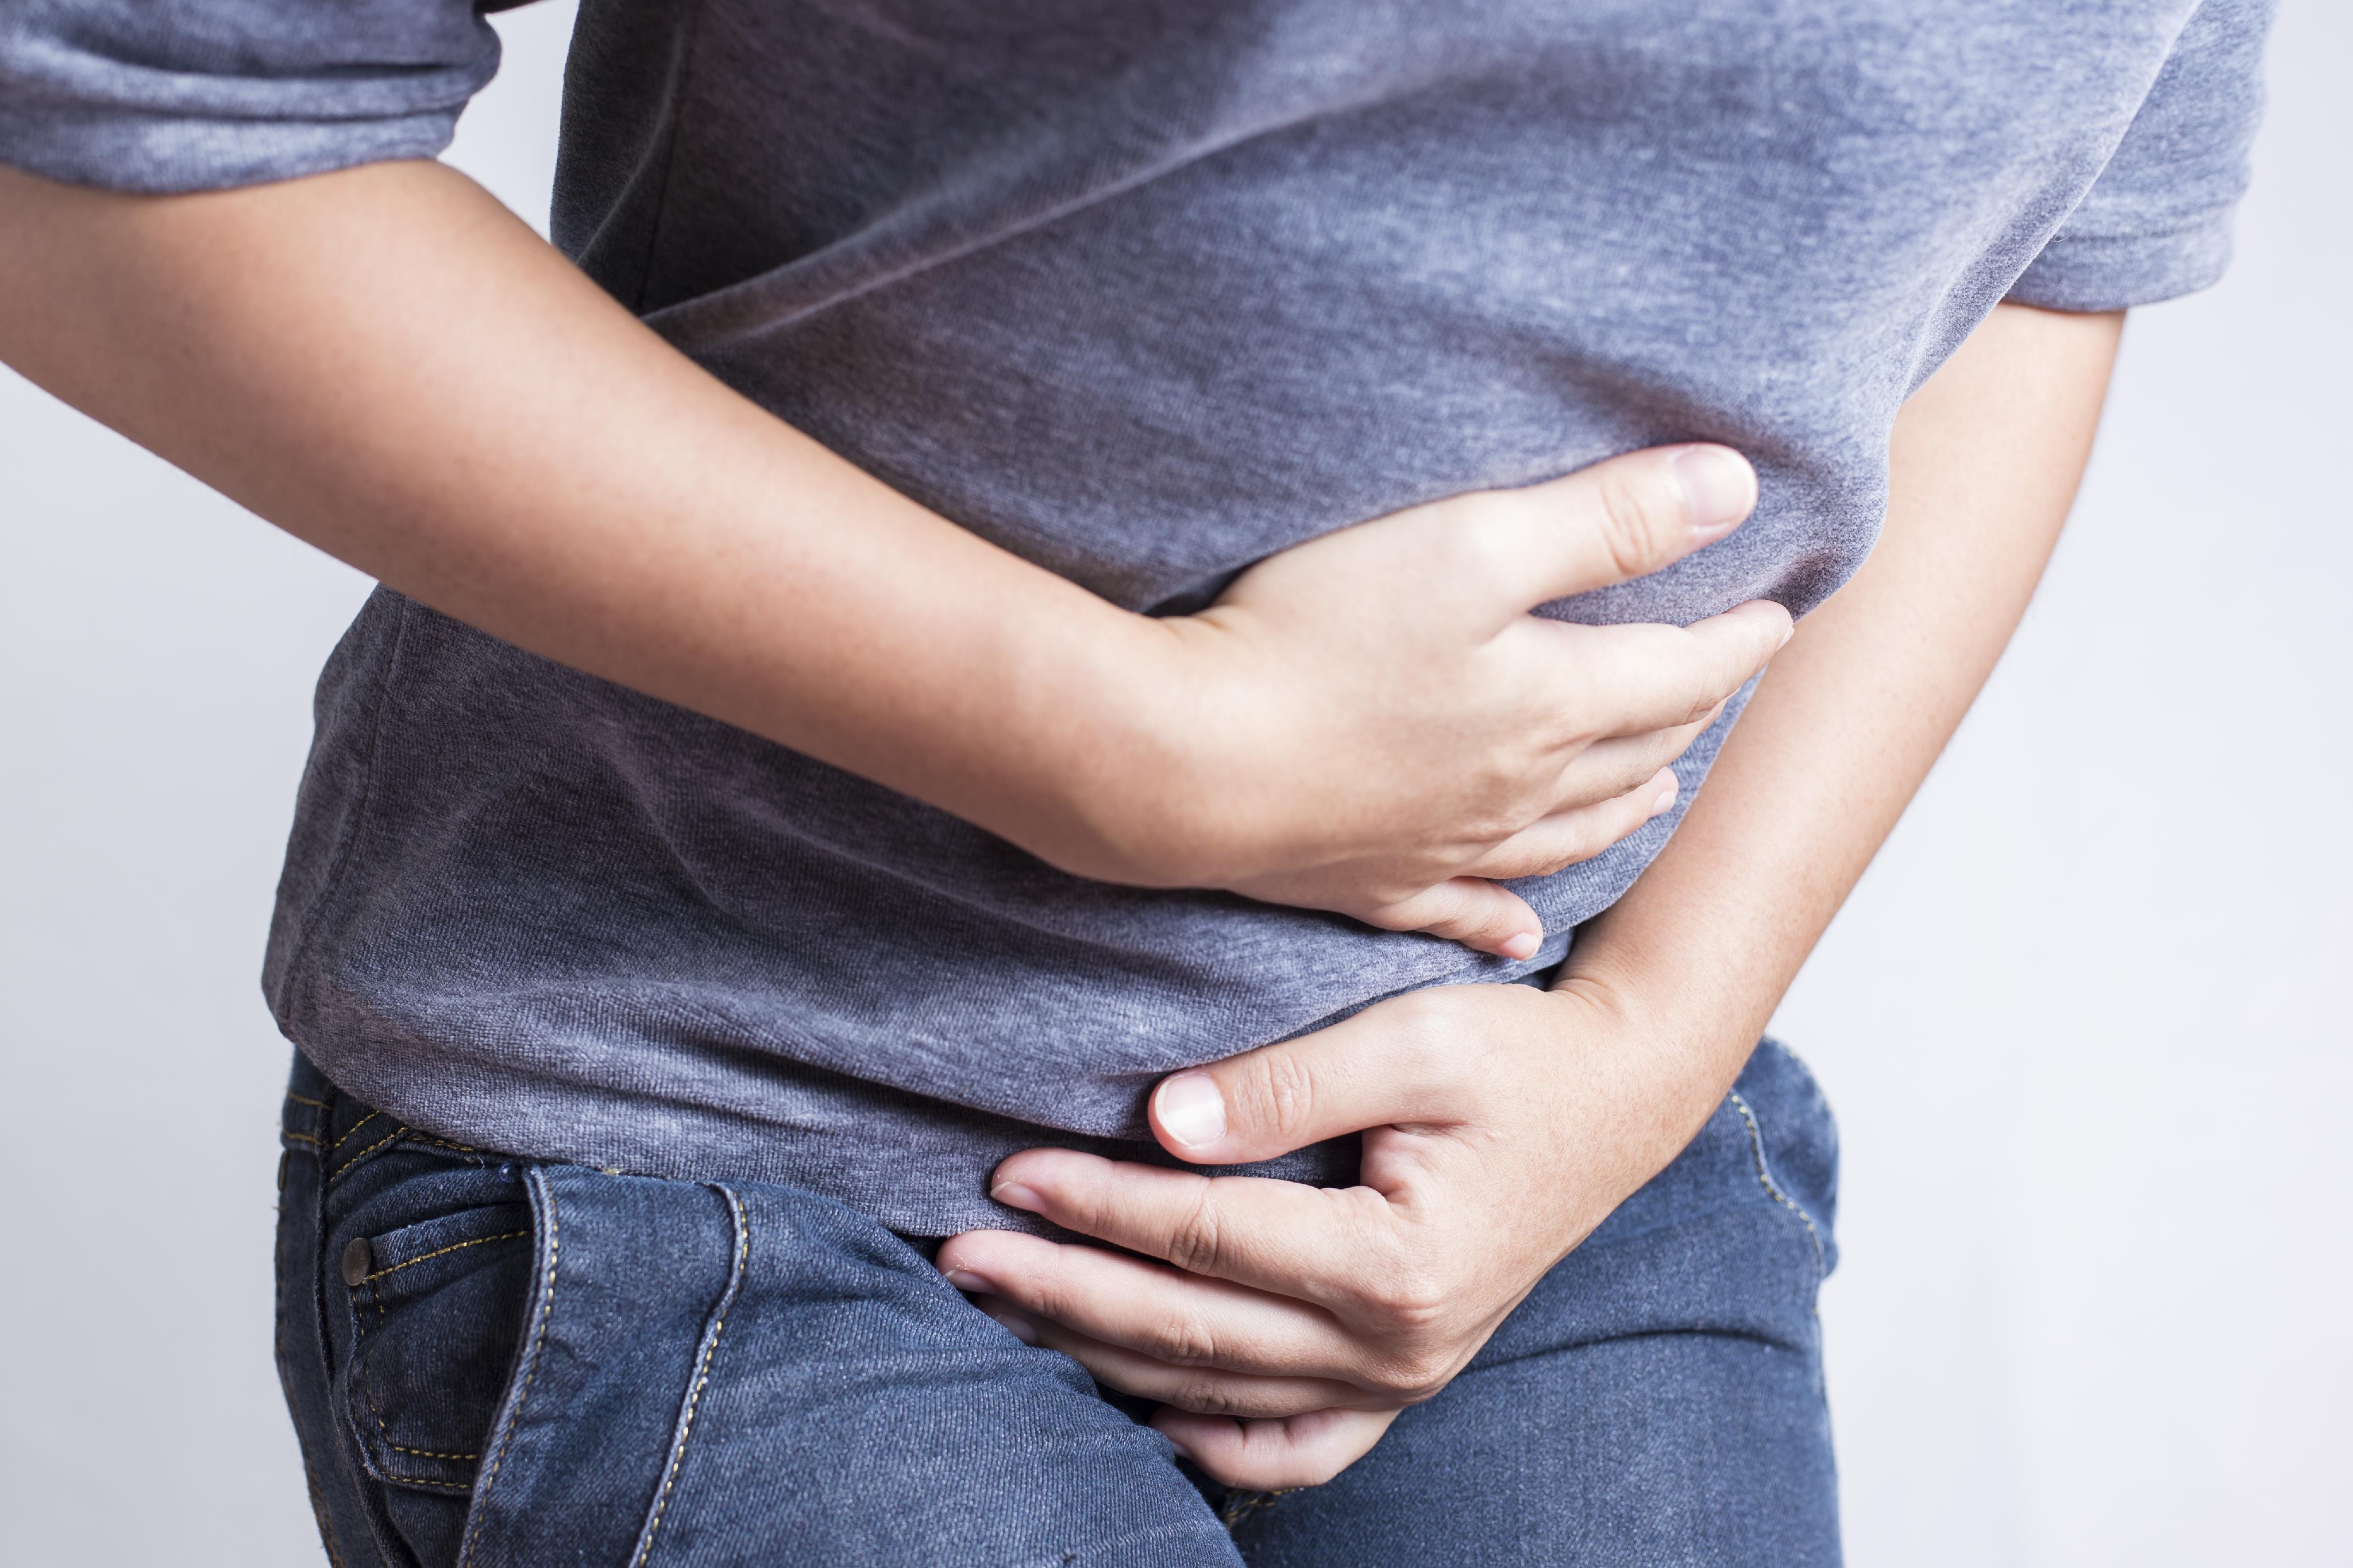 Lower Urinary Tract Symptoms: How to tell if it's really UTI